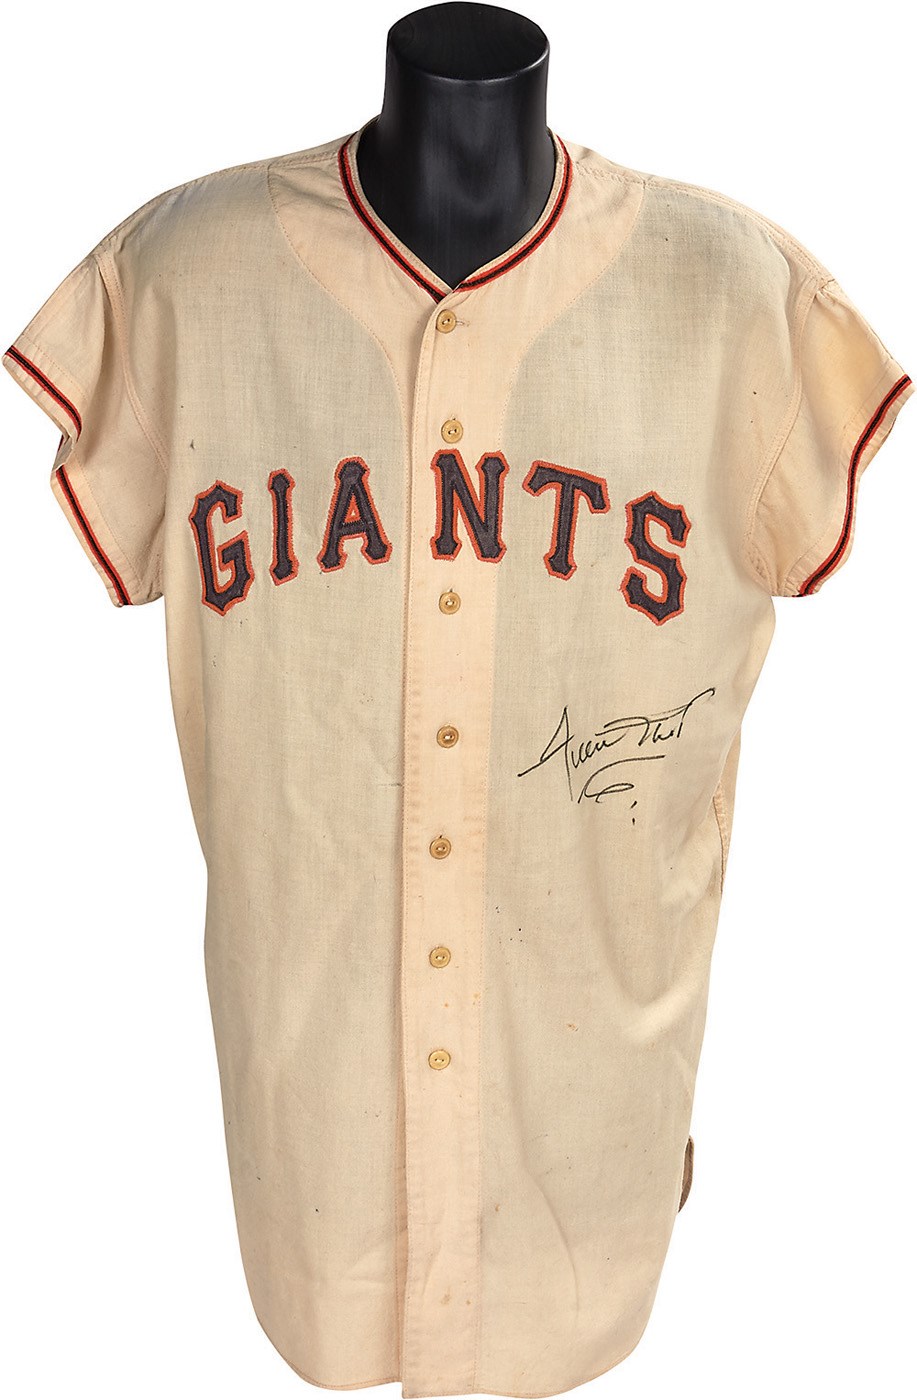 1957 Willie Mays New York Giants Game Worn Jersey from His Last Game at the Polo Grounds (MEARS 8)